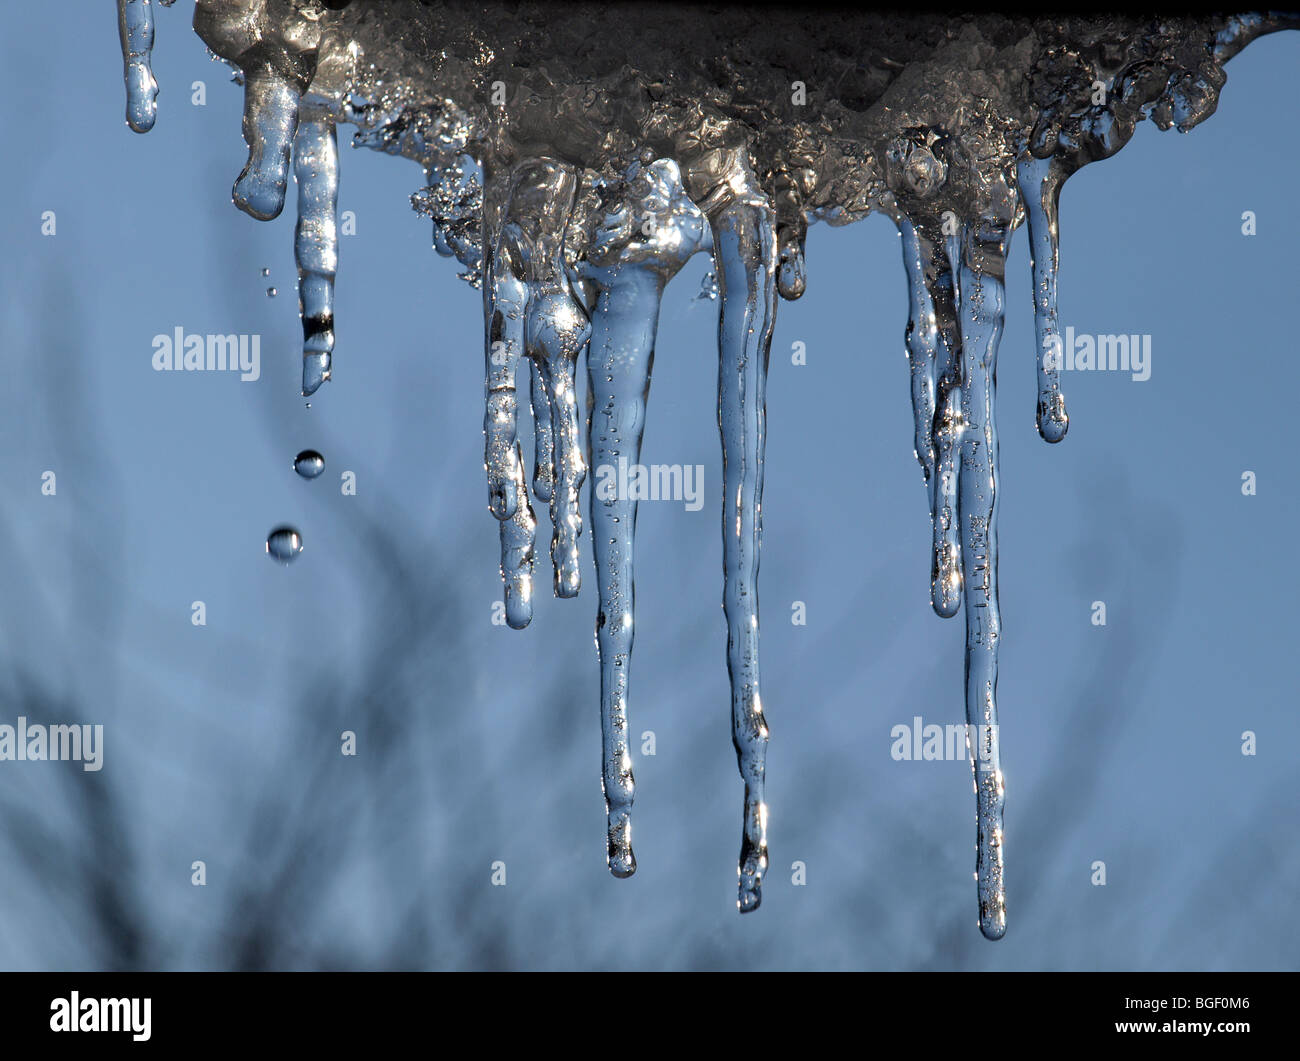 meltwater drips from melting icicles leaving two droplets captured in midair against clear blue sky symbolizing climate change and impending disaster Stock Photo